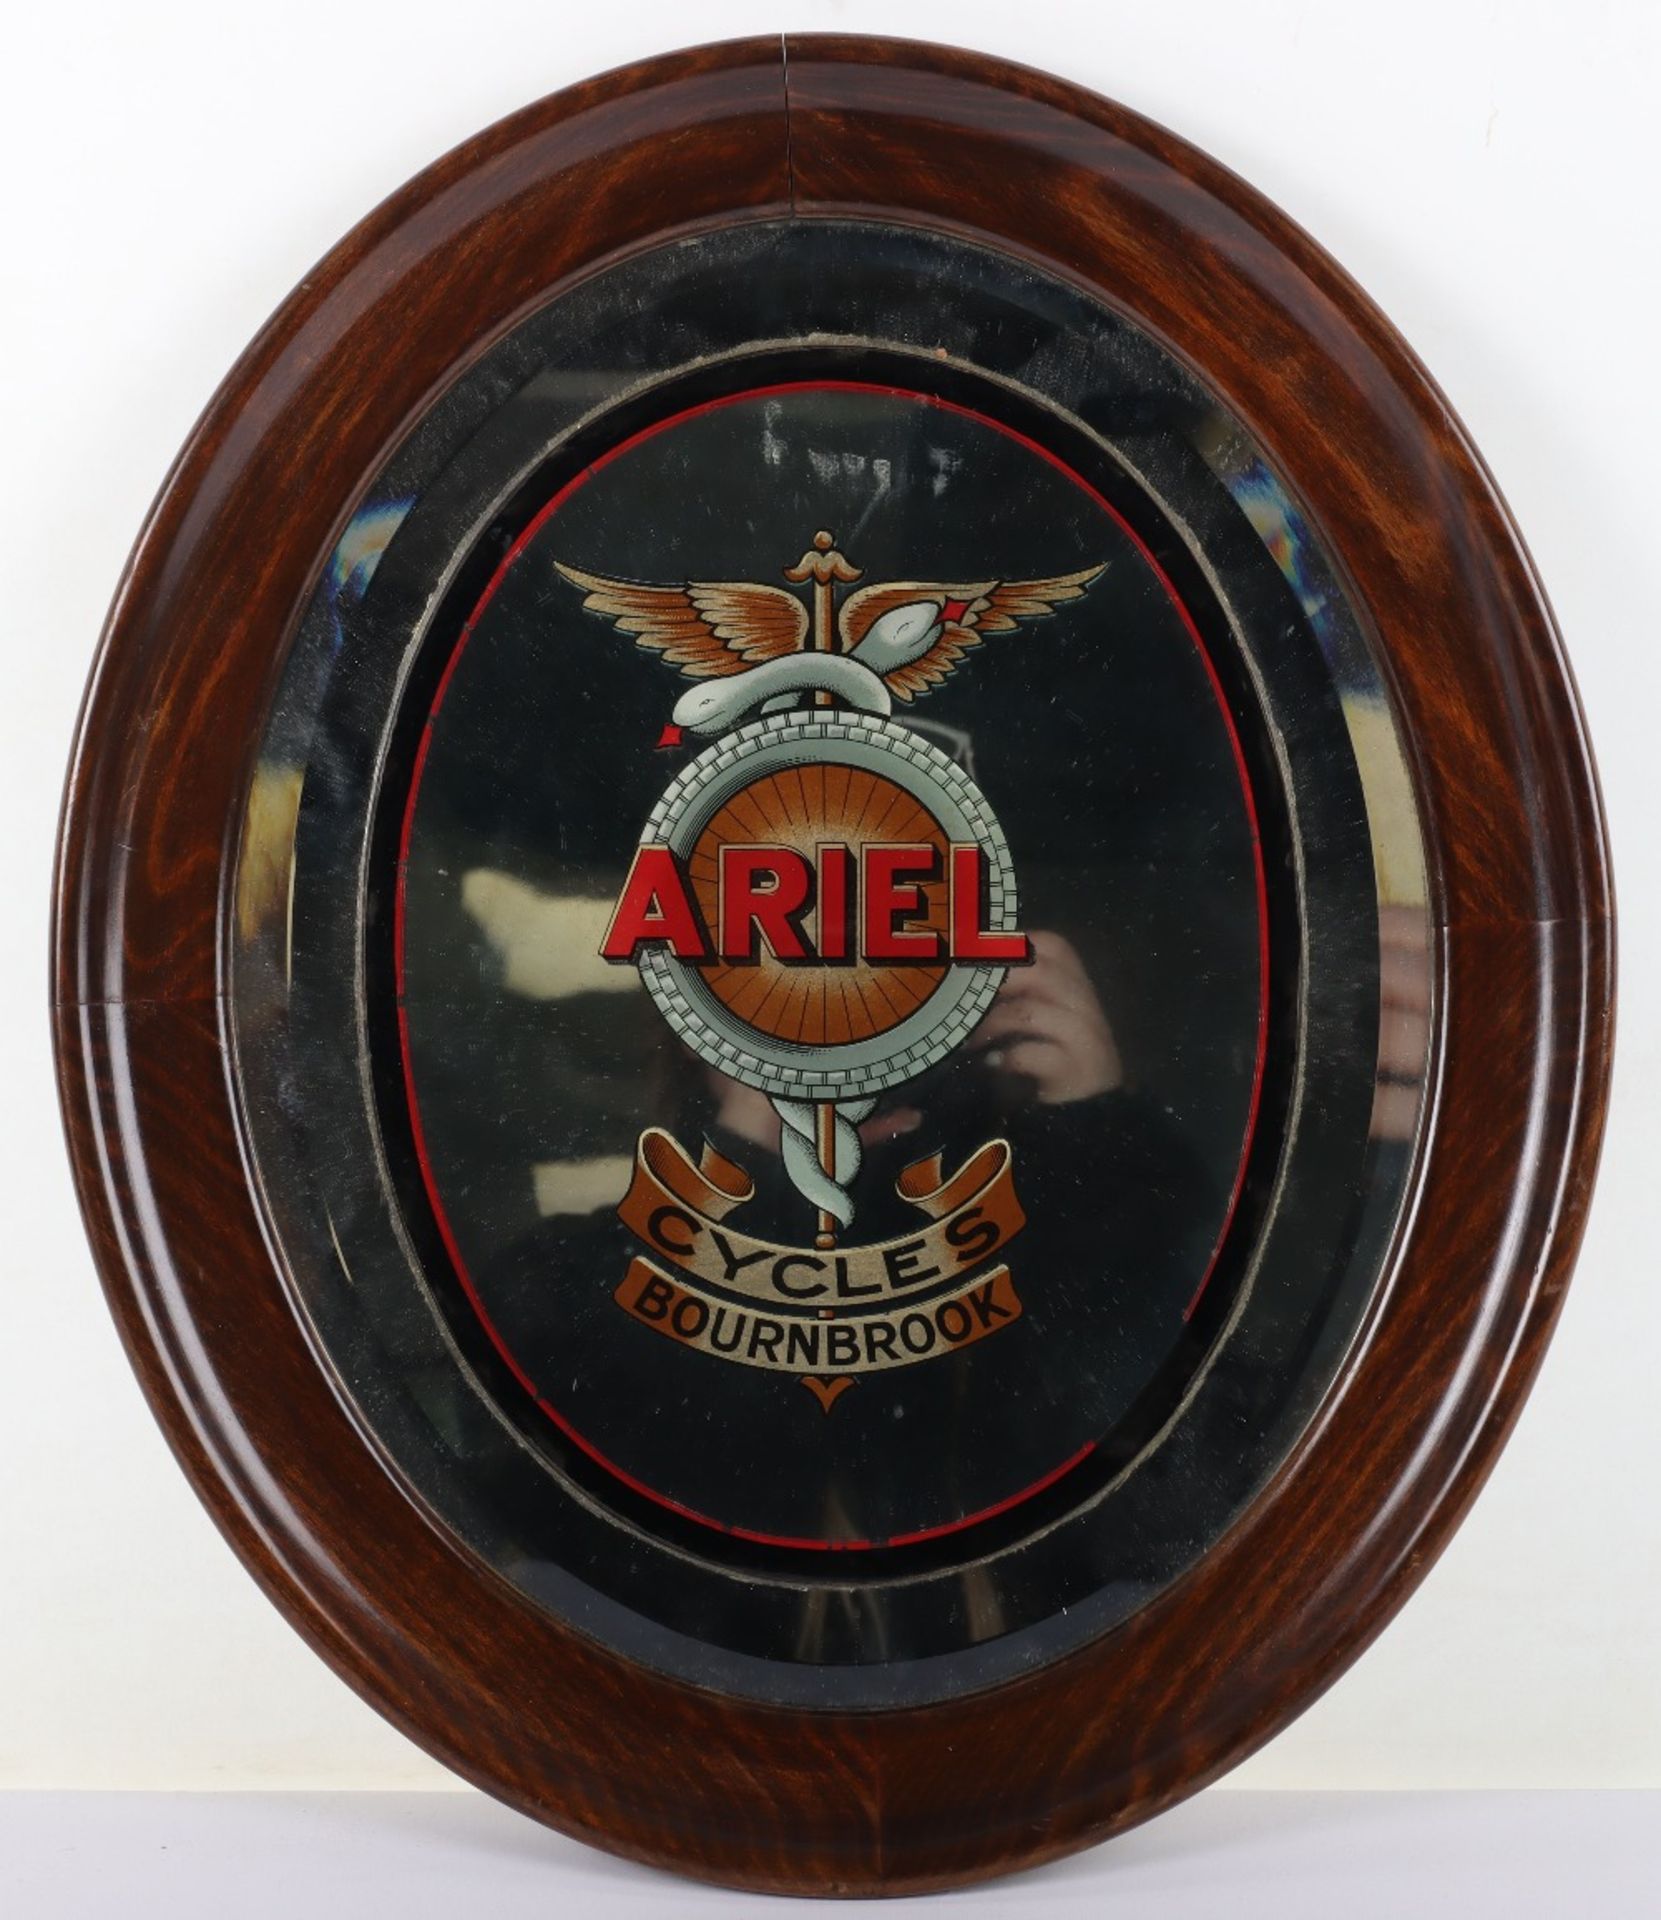 An Ariel Cycles Bournbrook oval advertising mirror - Image 2 of 5